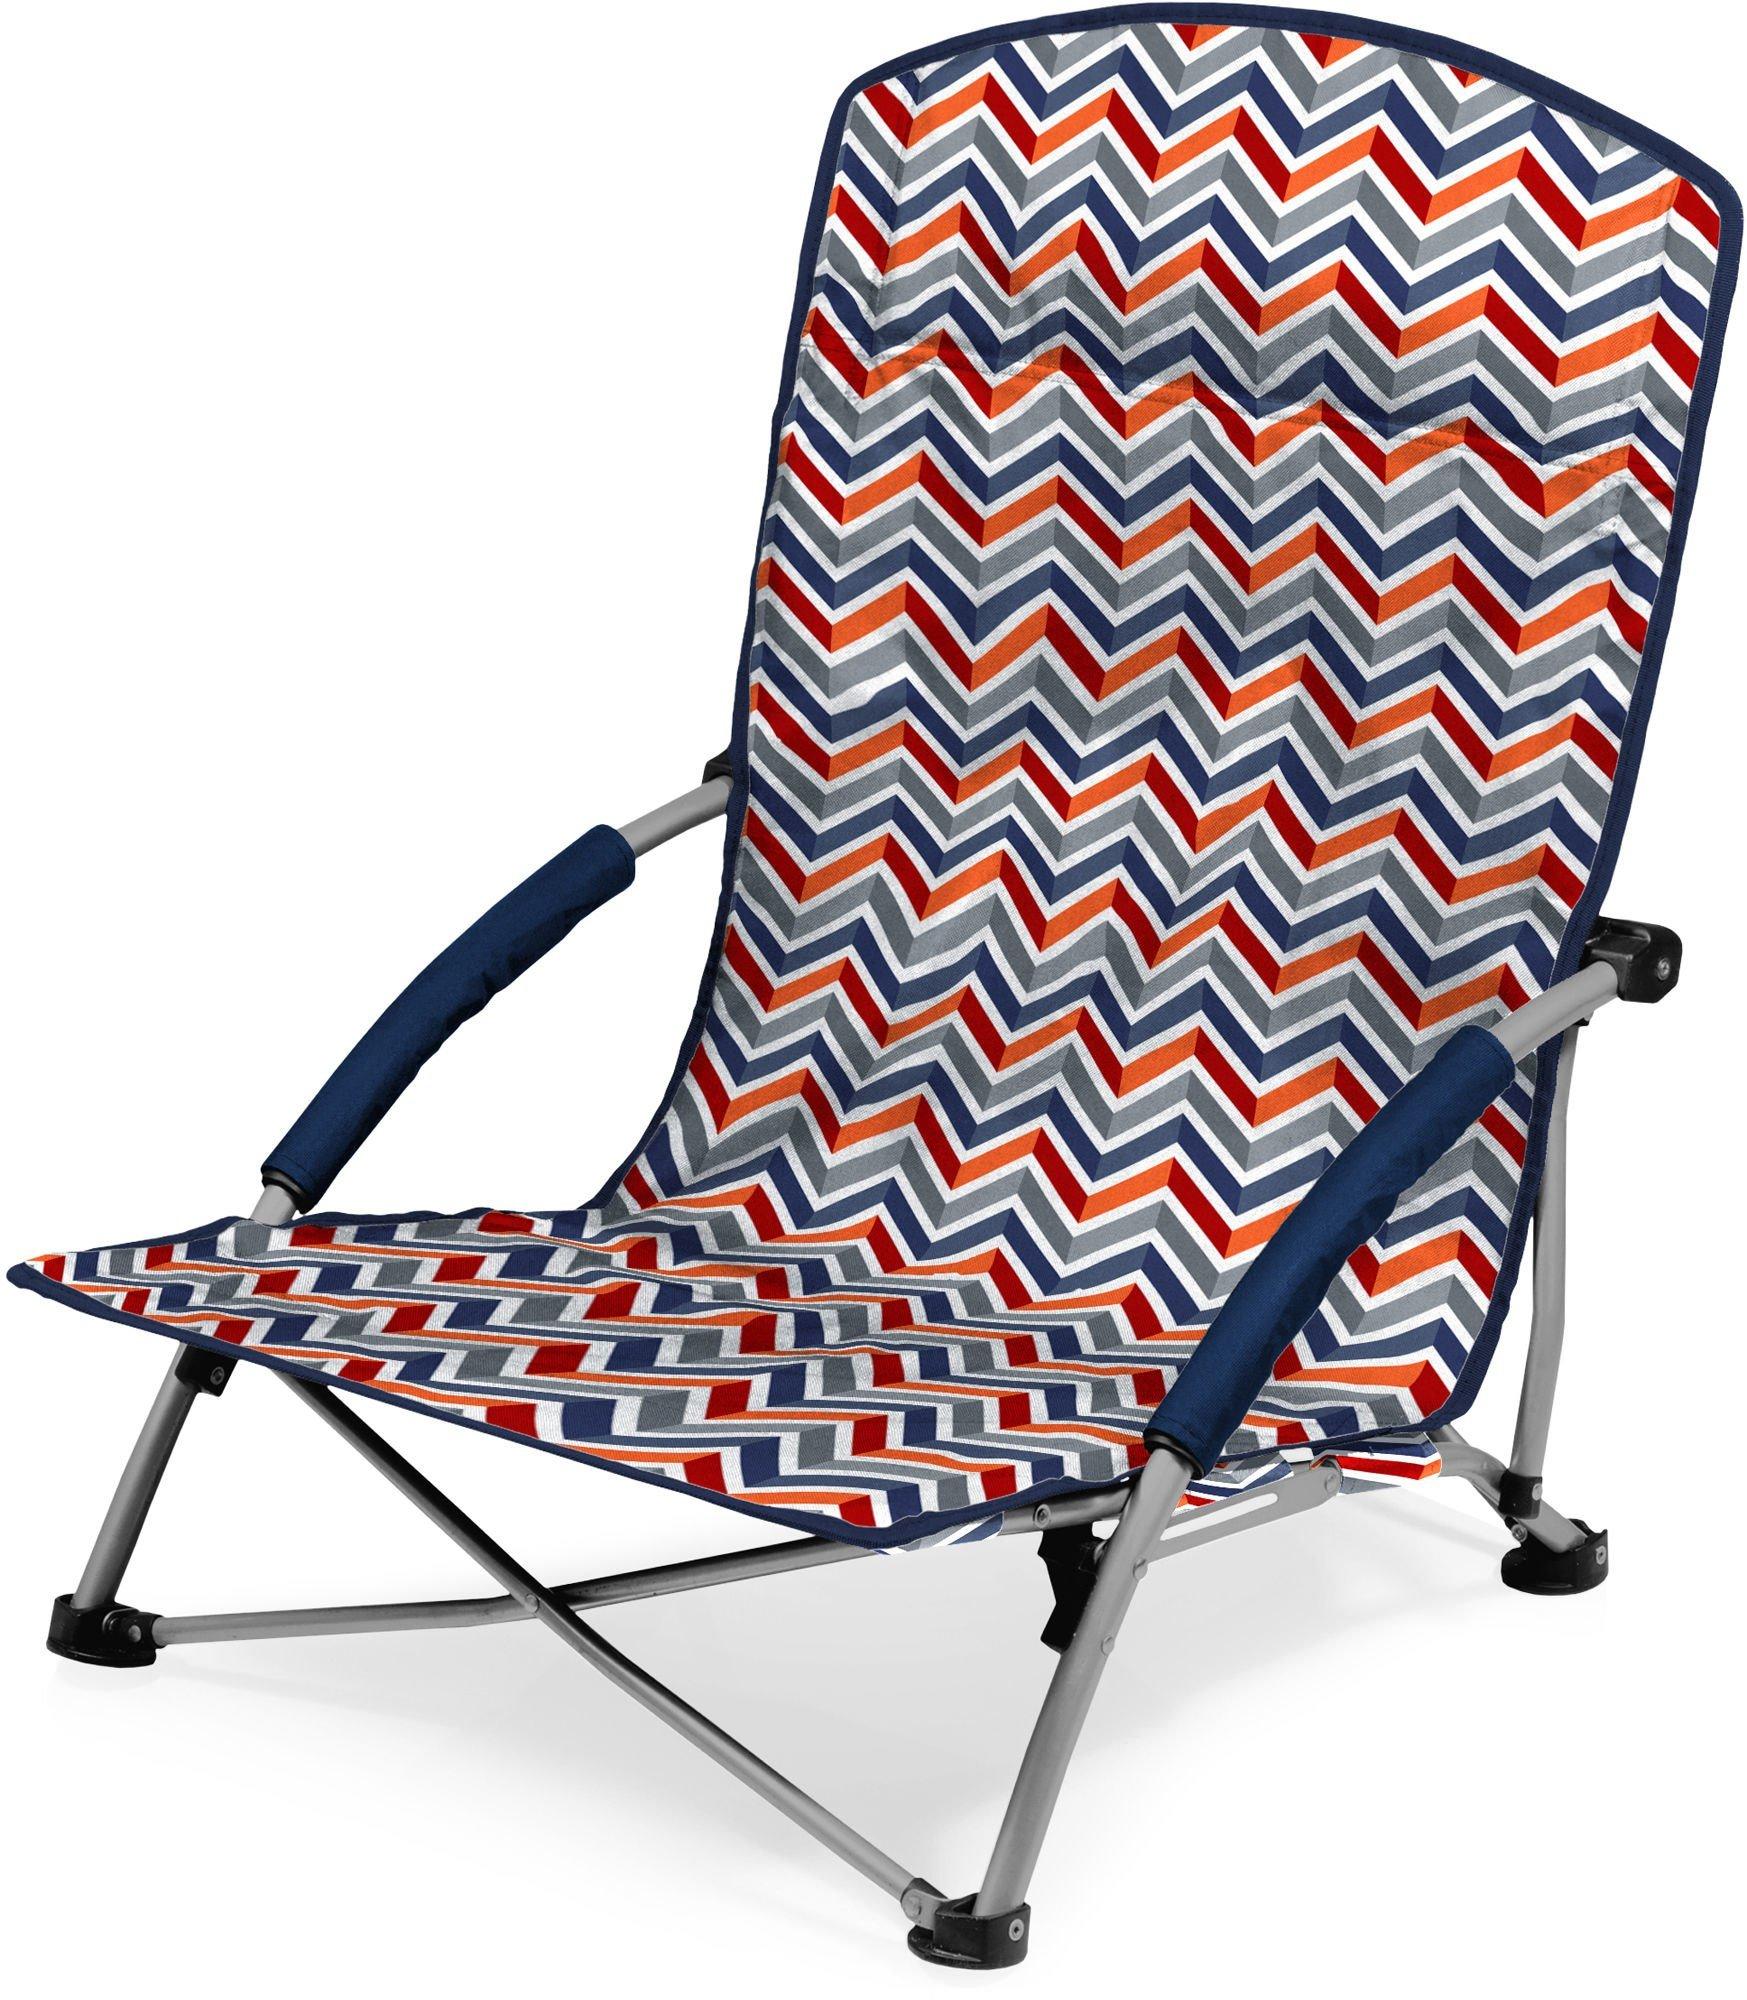 Picnic Time Vibe Tranquility Chair